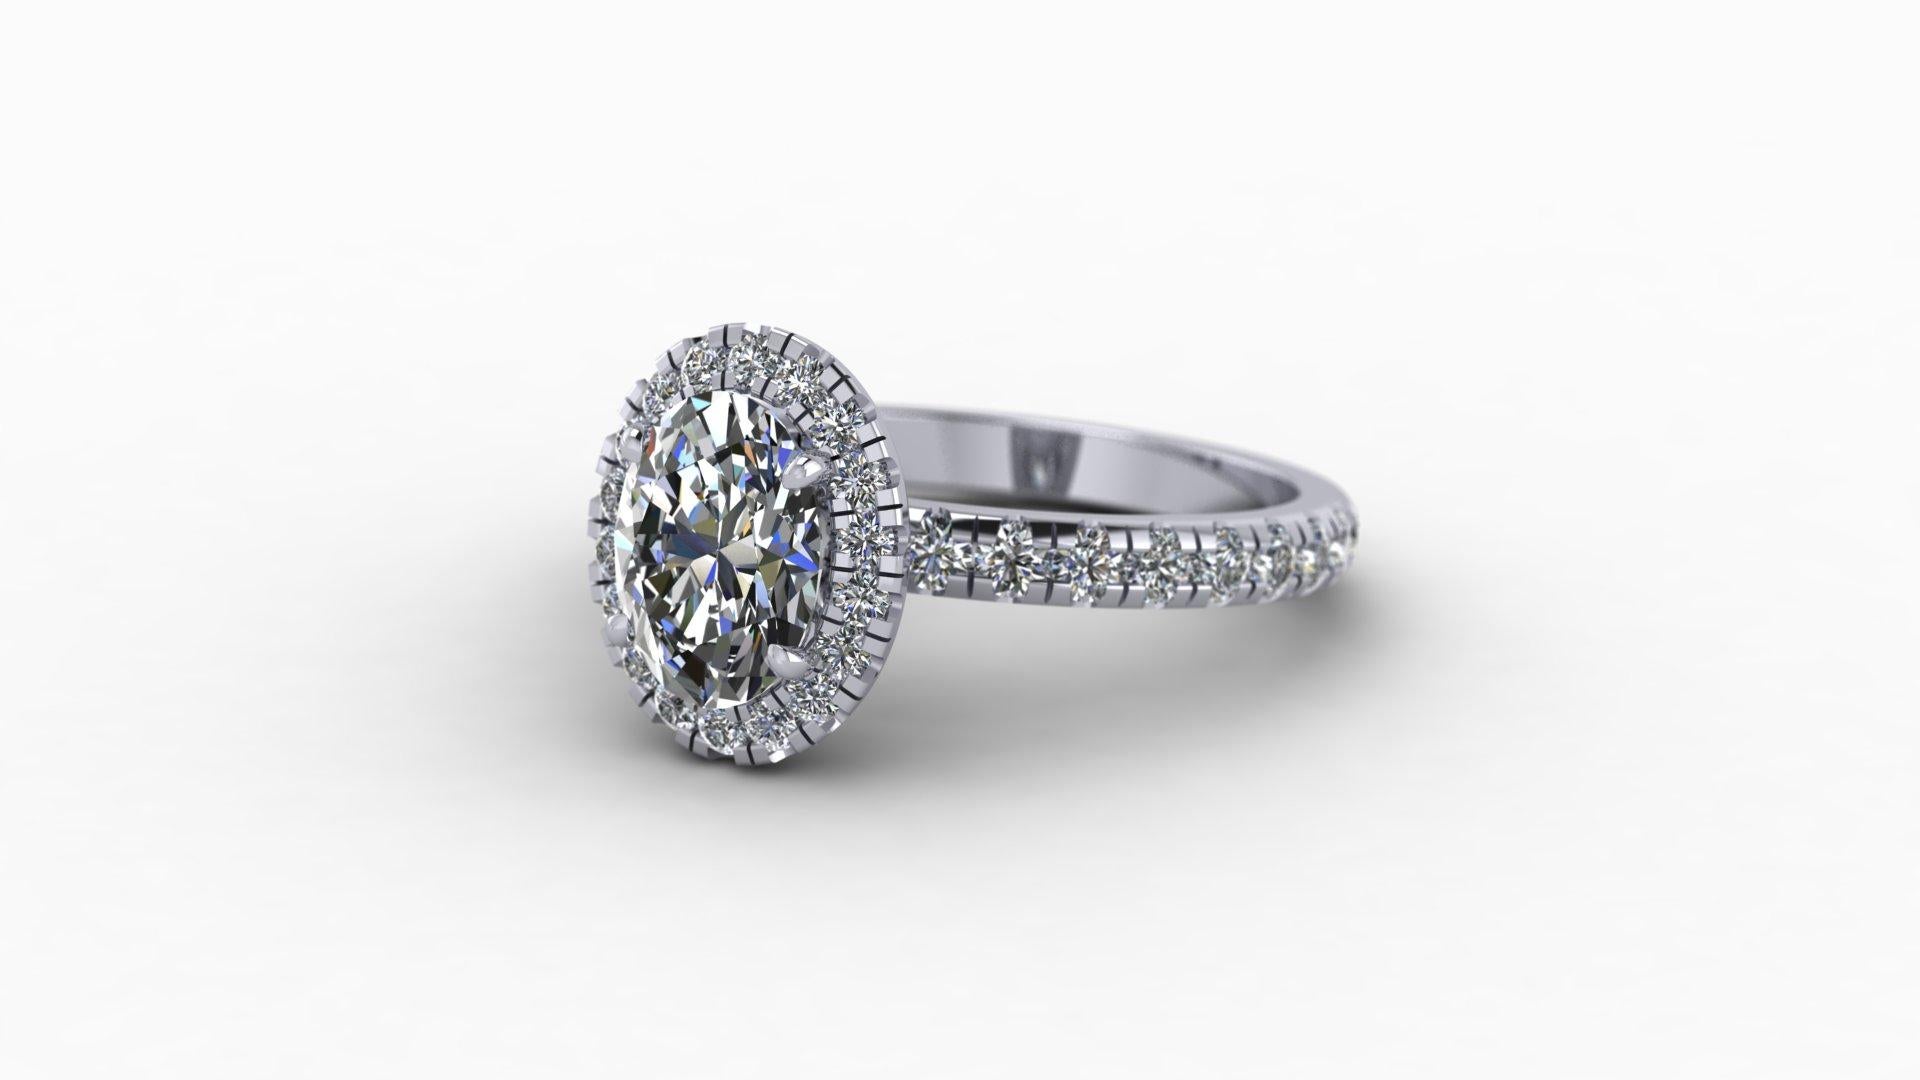 Harry Winston Inspired 1.2 Carat Oval Cut Diamond Halo Engagement Ring For Sale 1